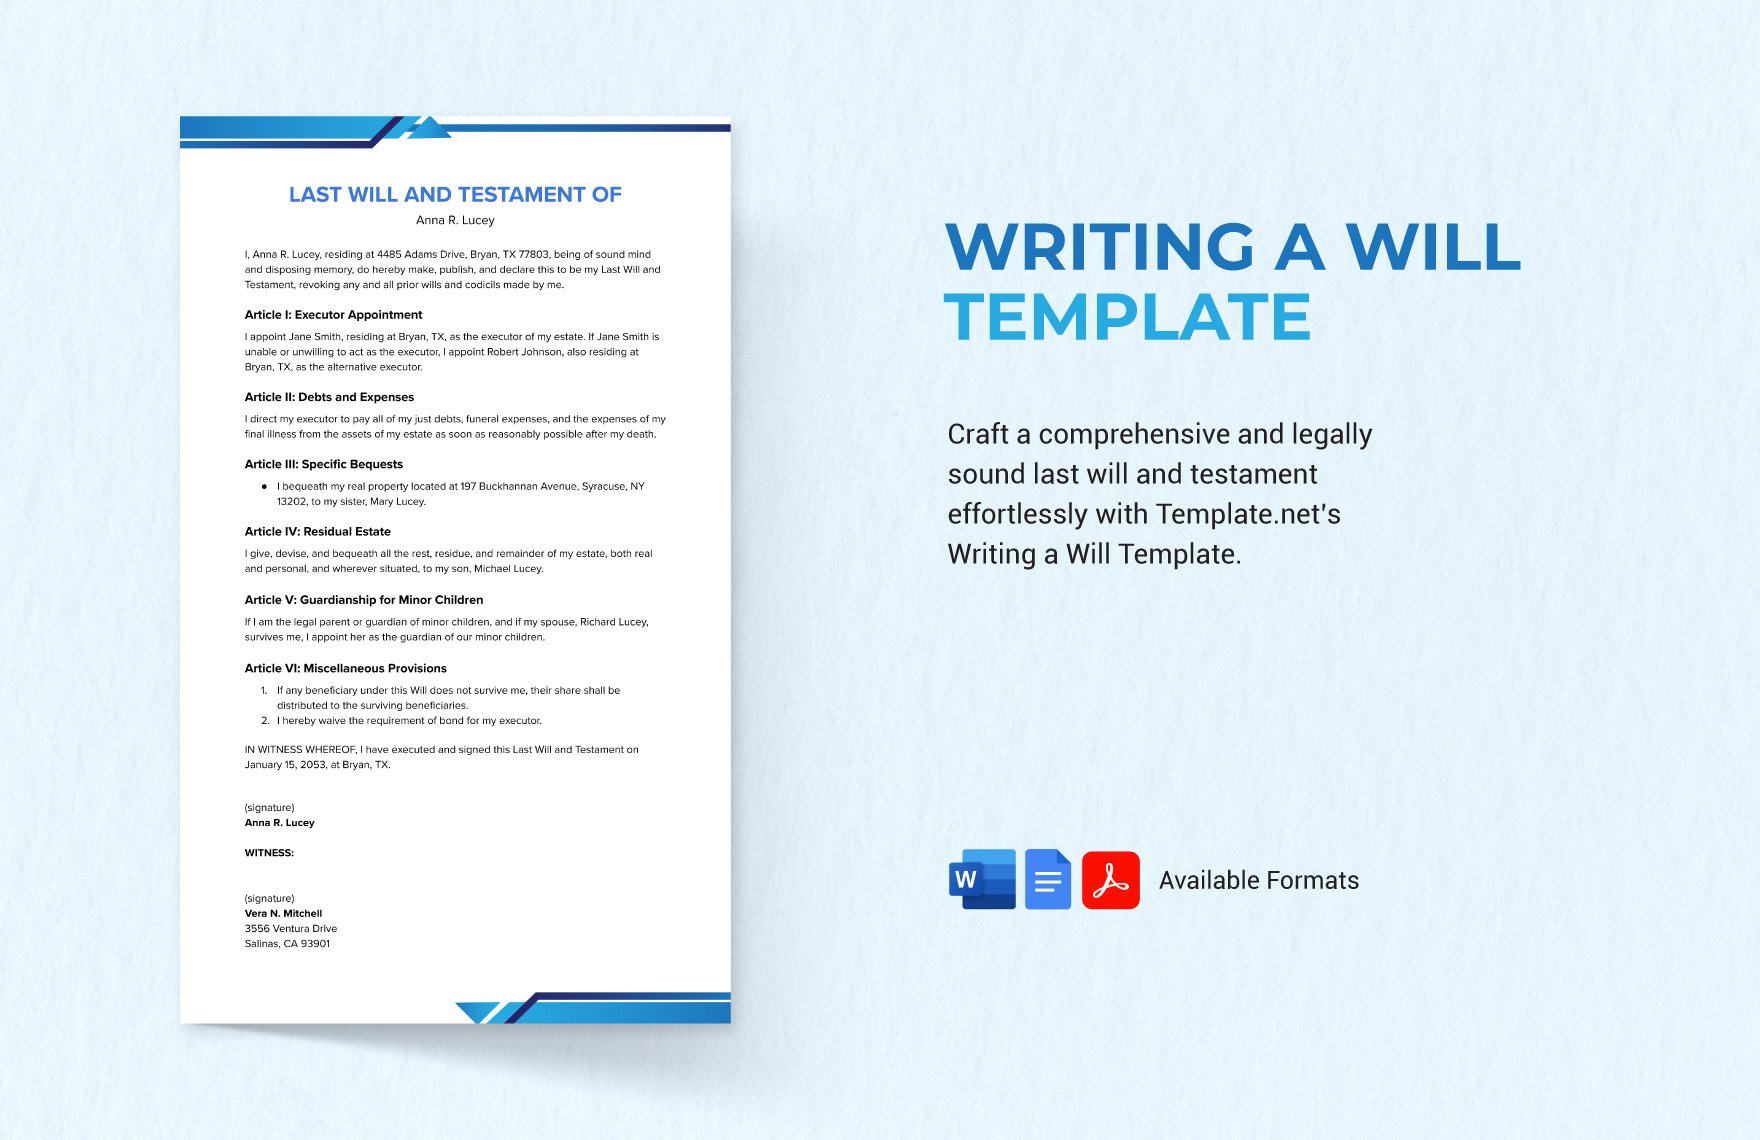 Writing a Will Template